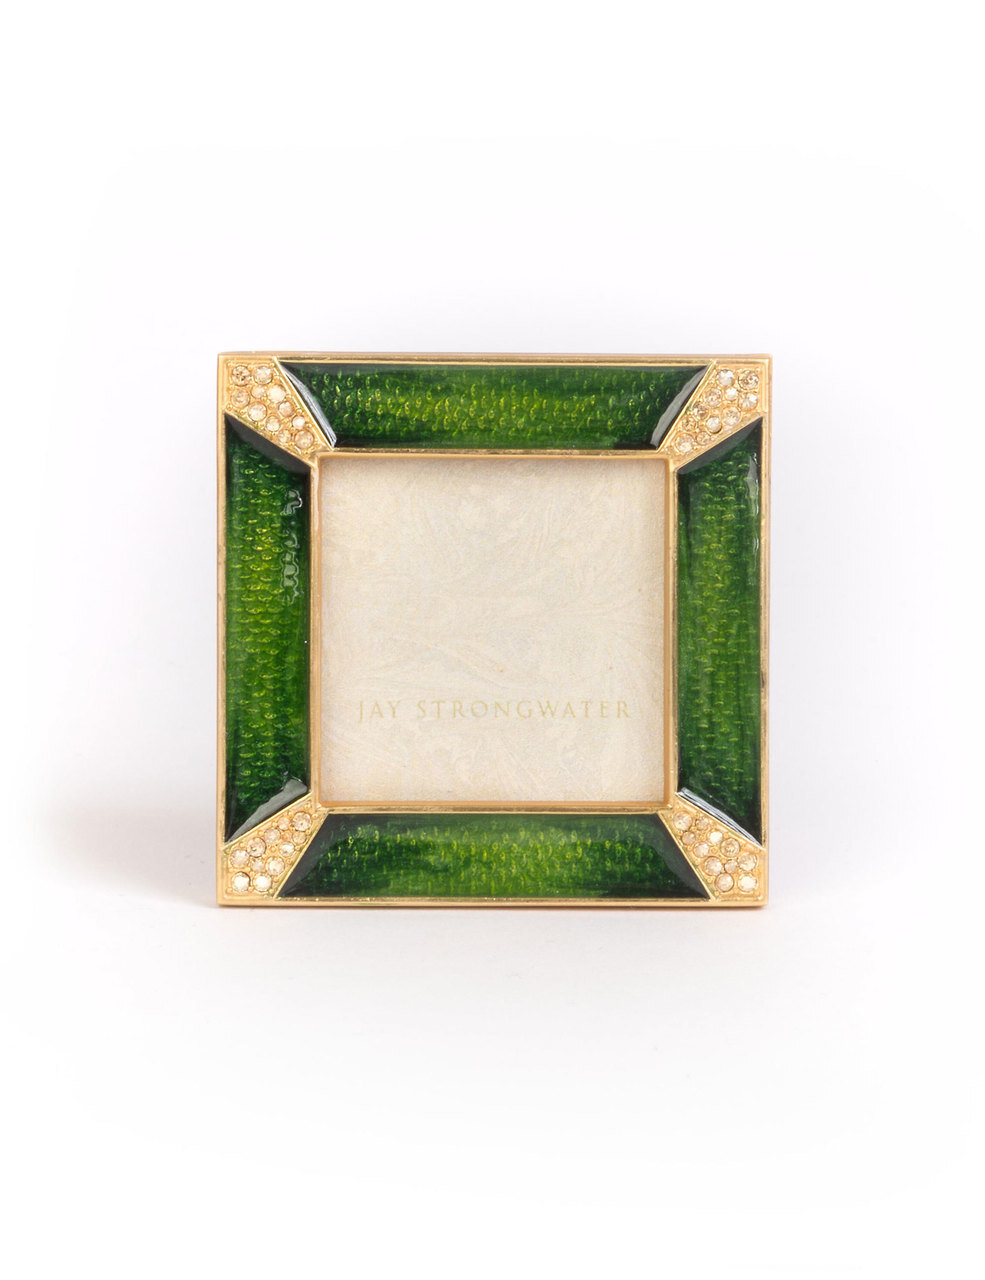 Jay Strongwater Leland Pave Corner 2 Inch Square Picture Frame Emerald SPF5130-242